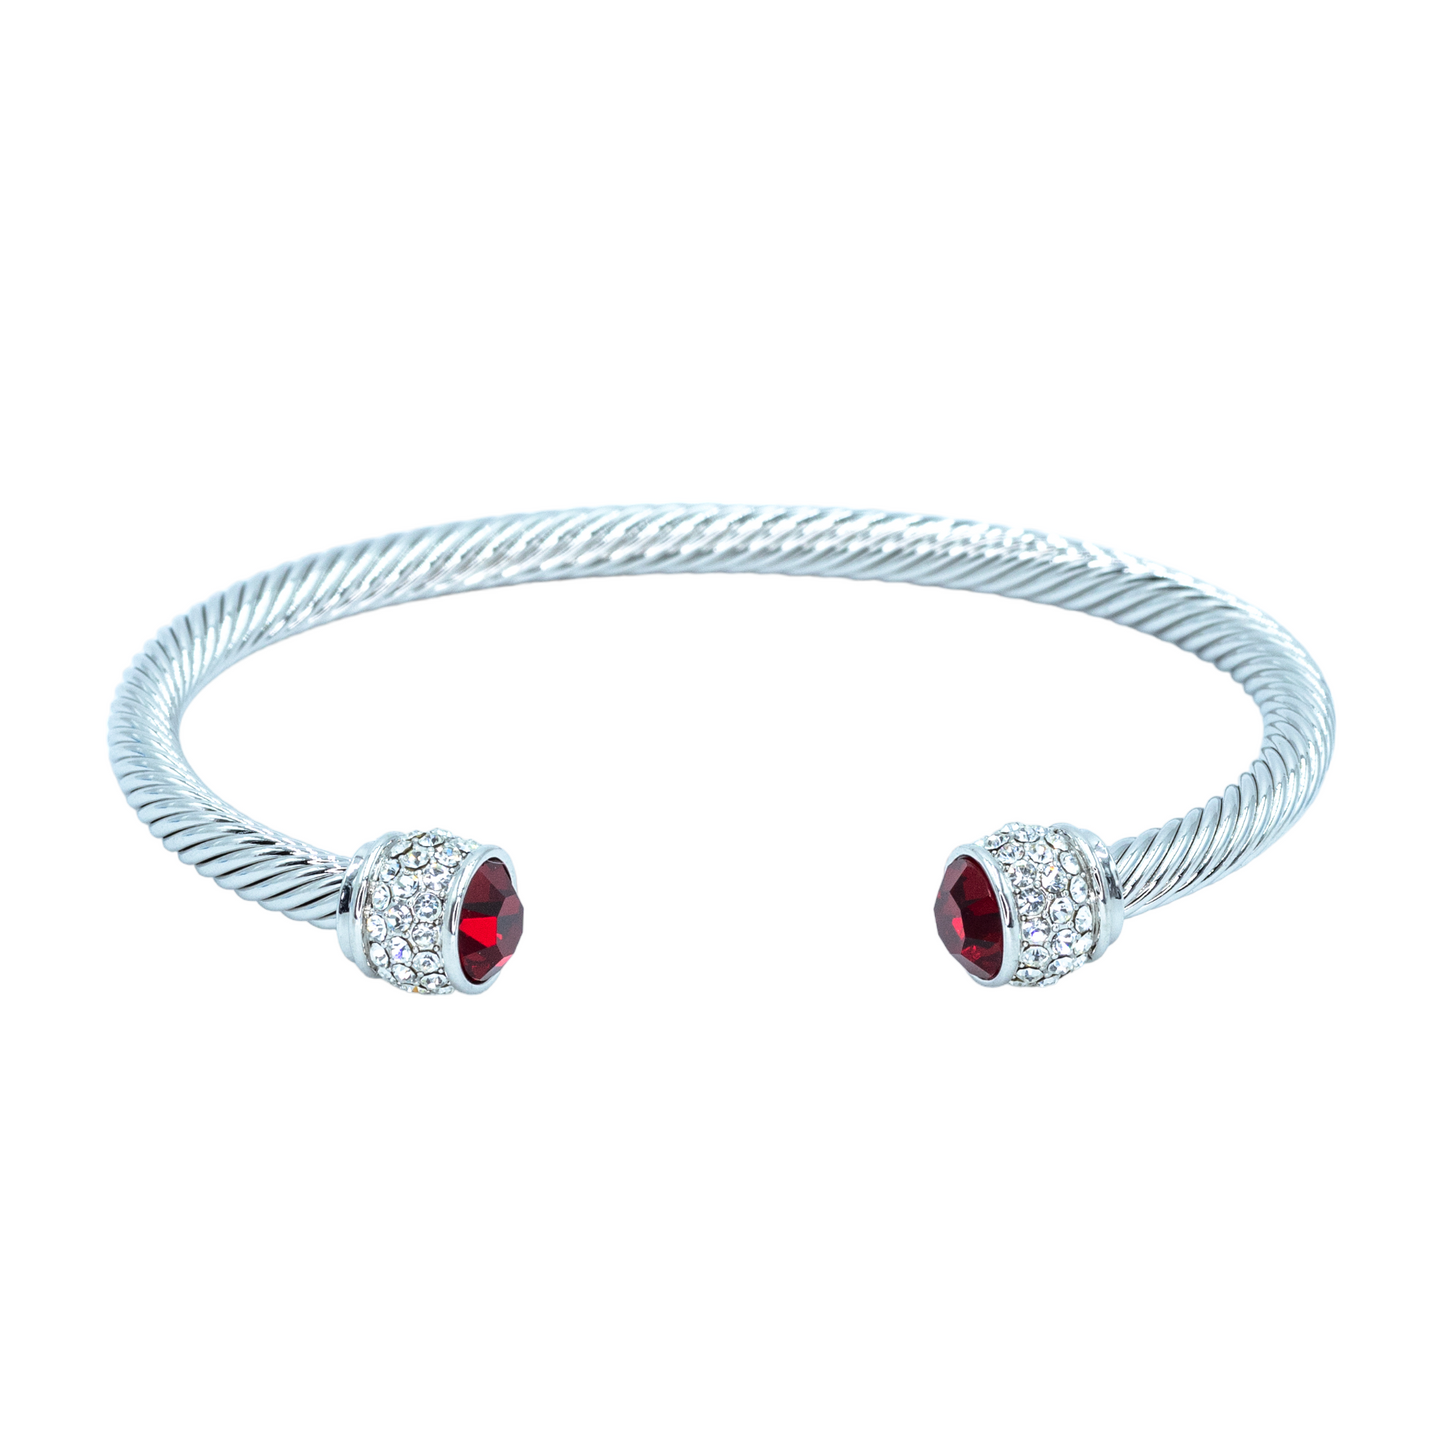 Rhodium plated bangle w/ CZ stones and ruby stone